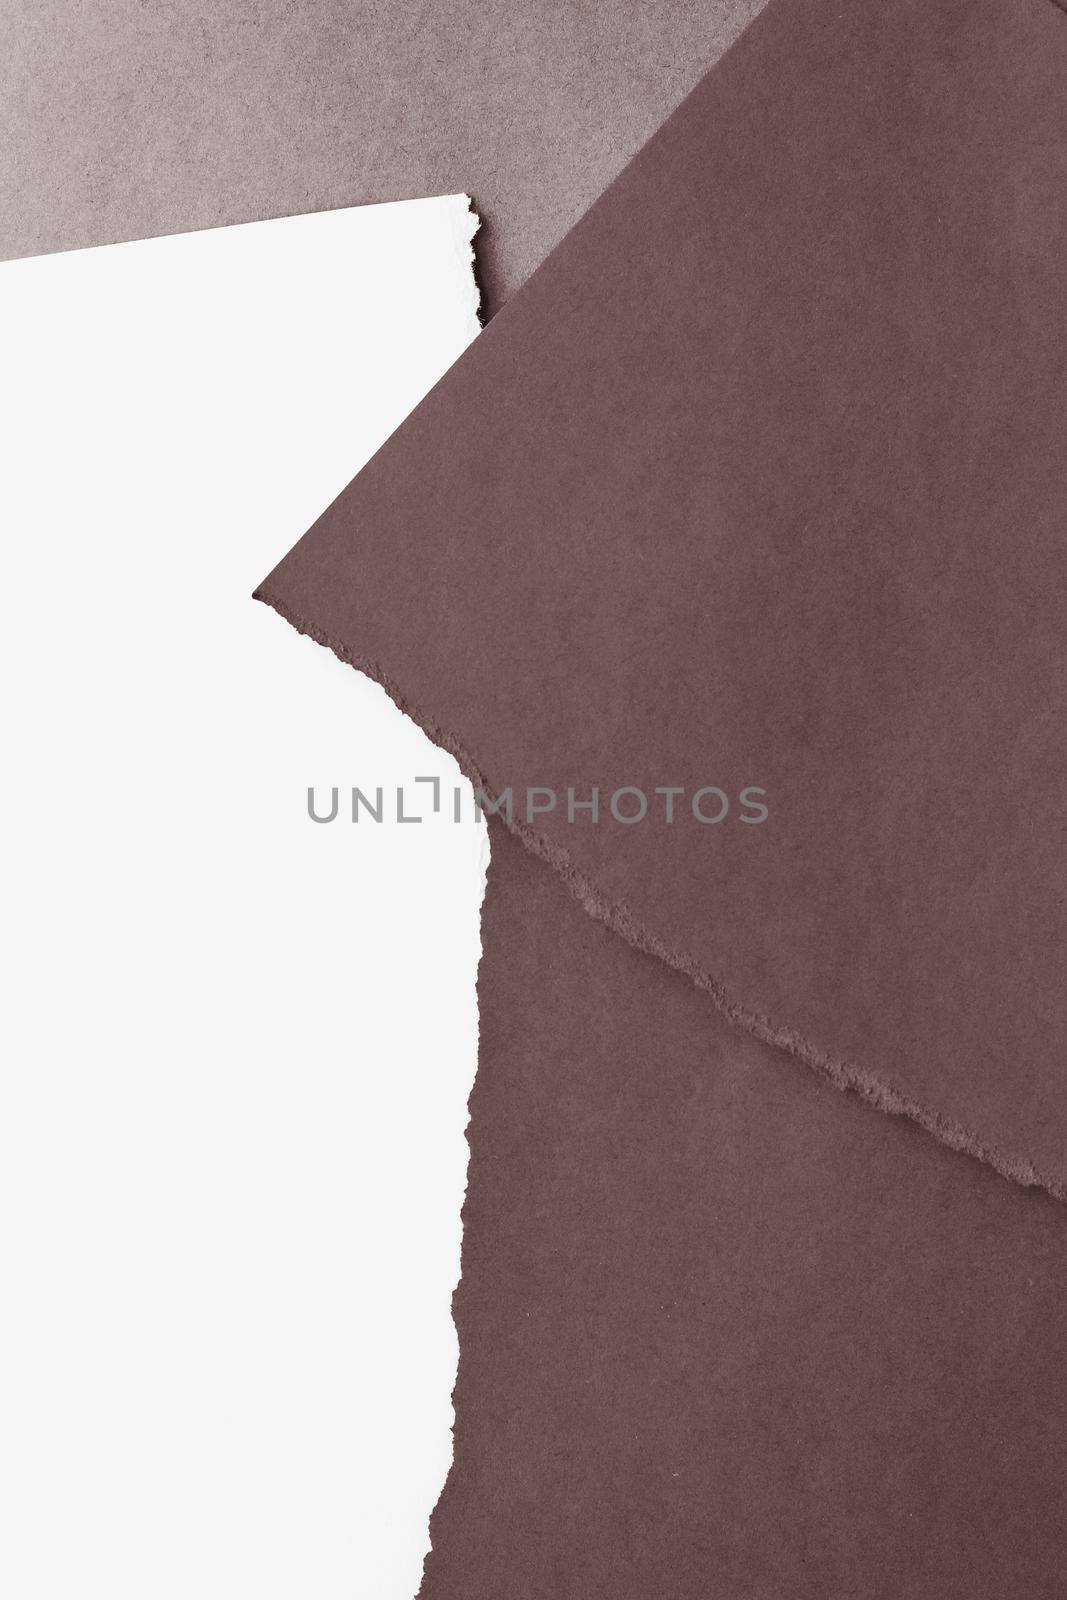 Torn paper texture as background. Creativity takes time